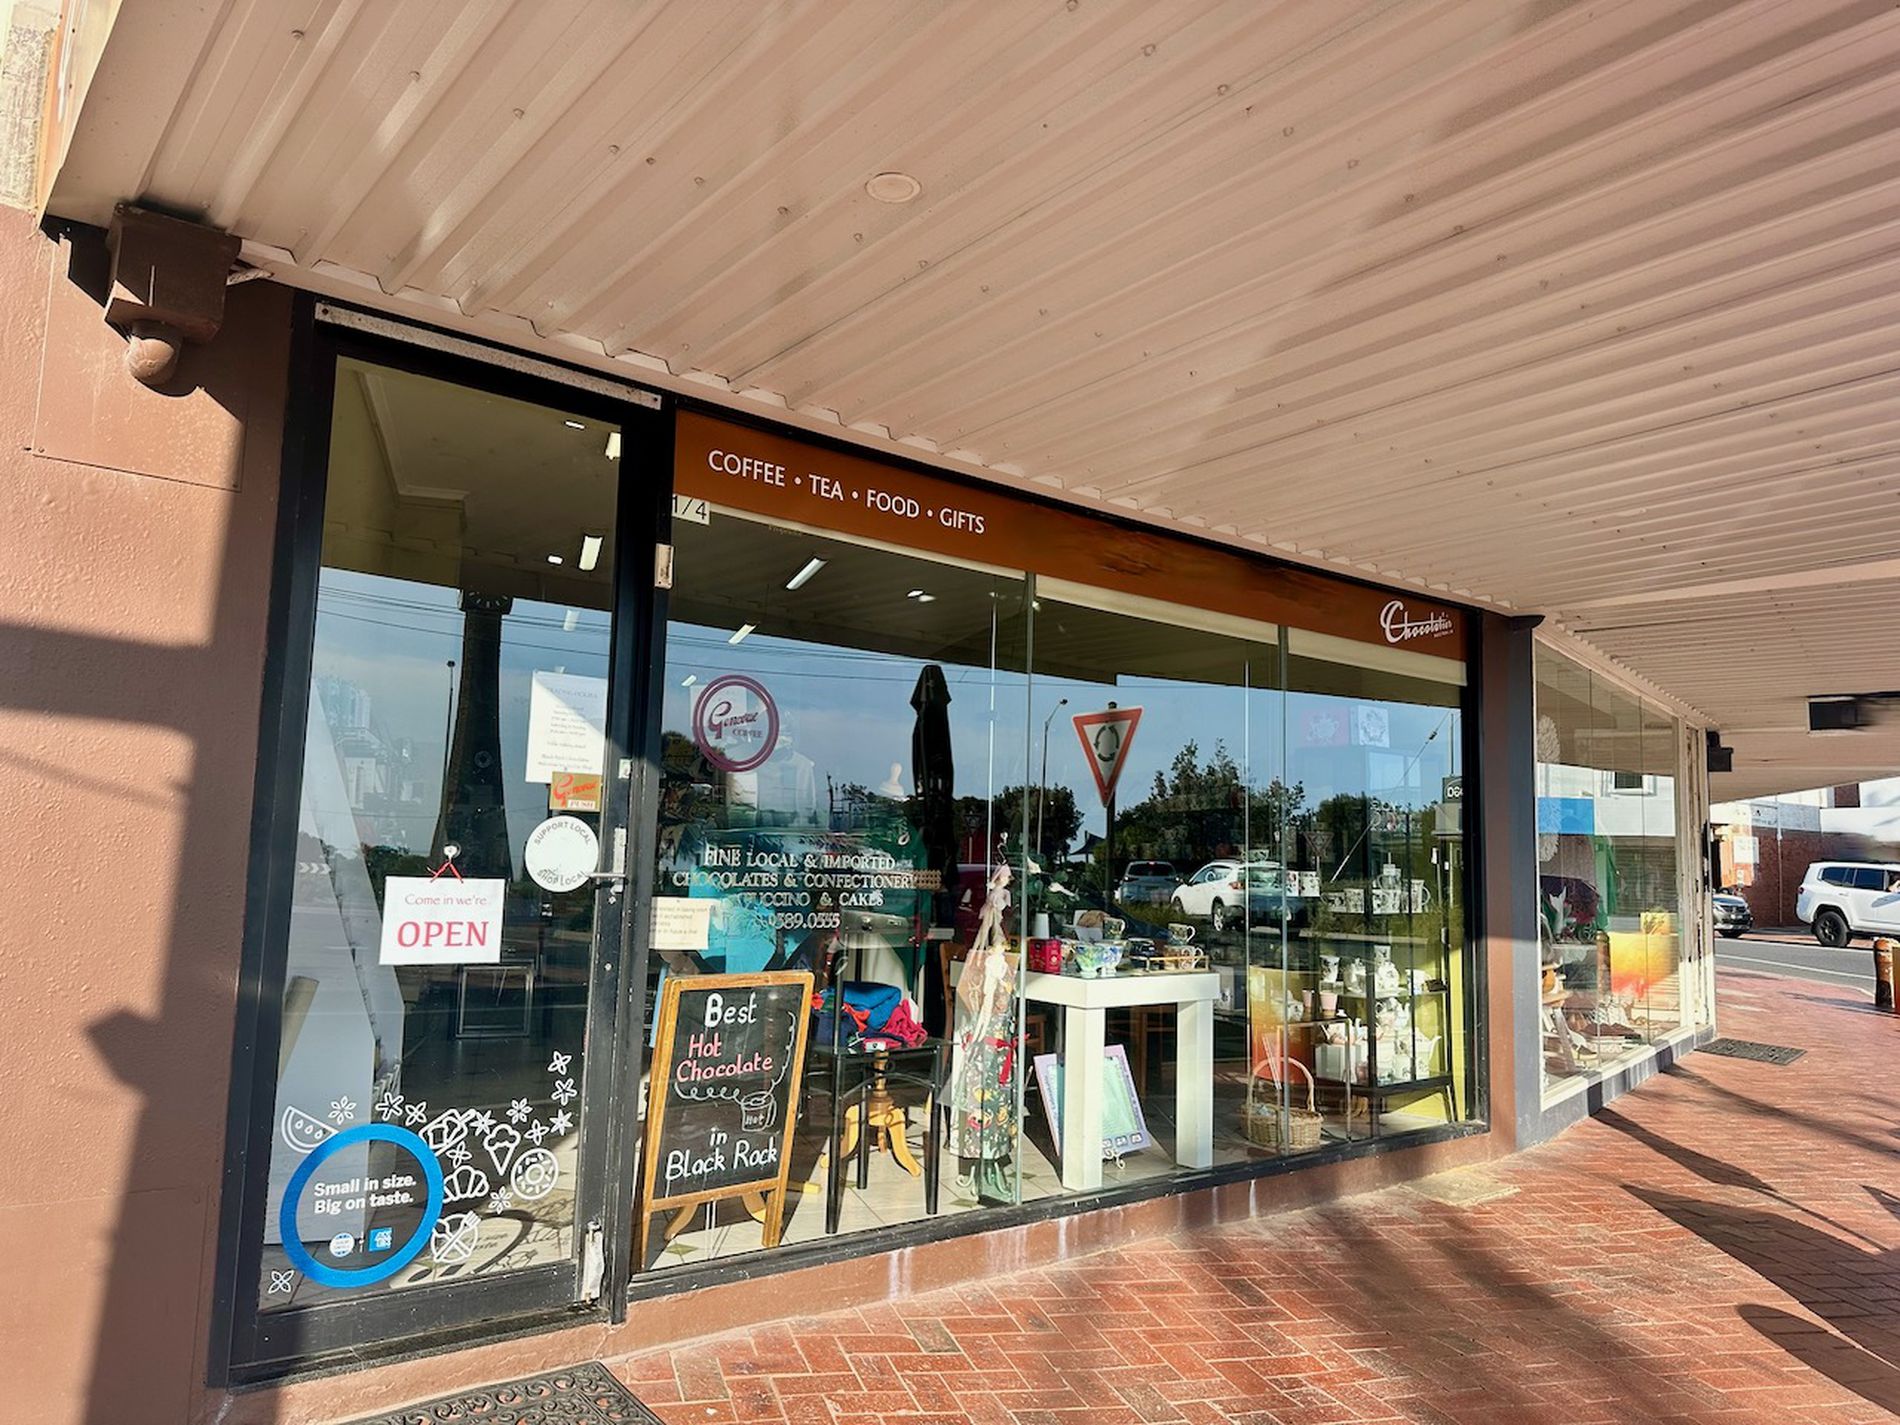 Cafe, Chocolate and Gift Shop Business For Sale Bayside